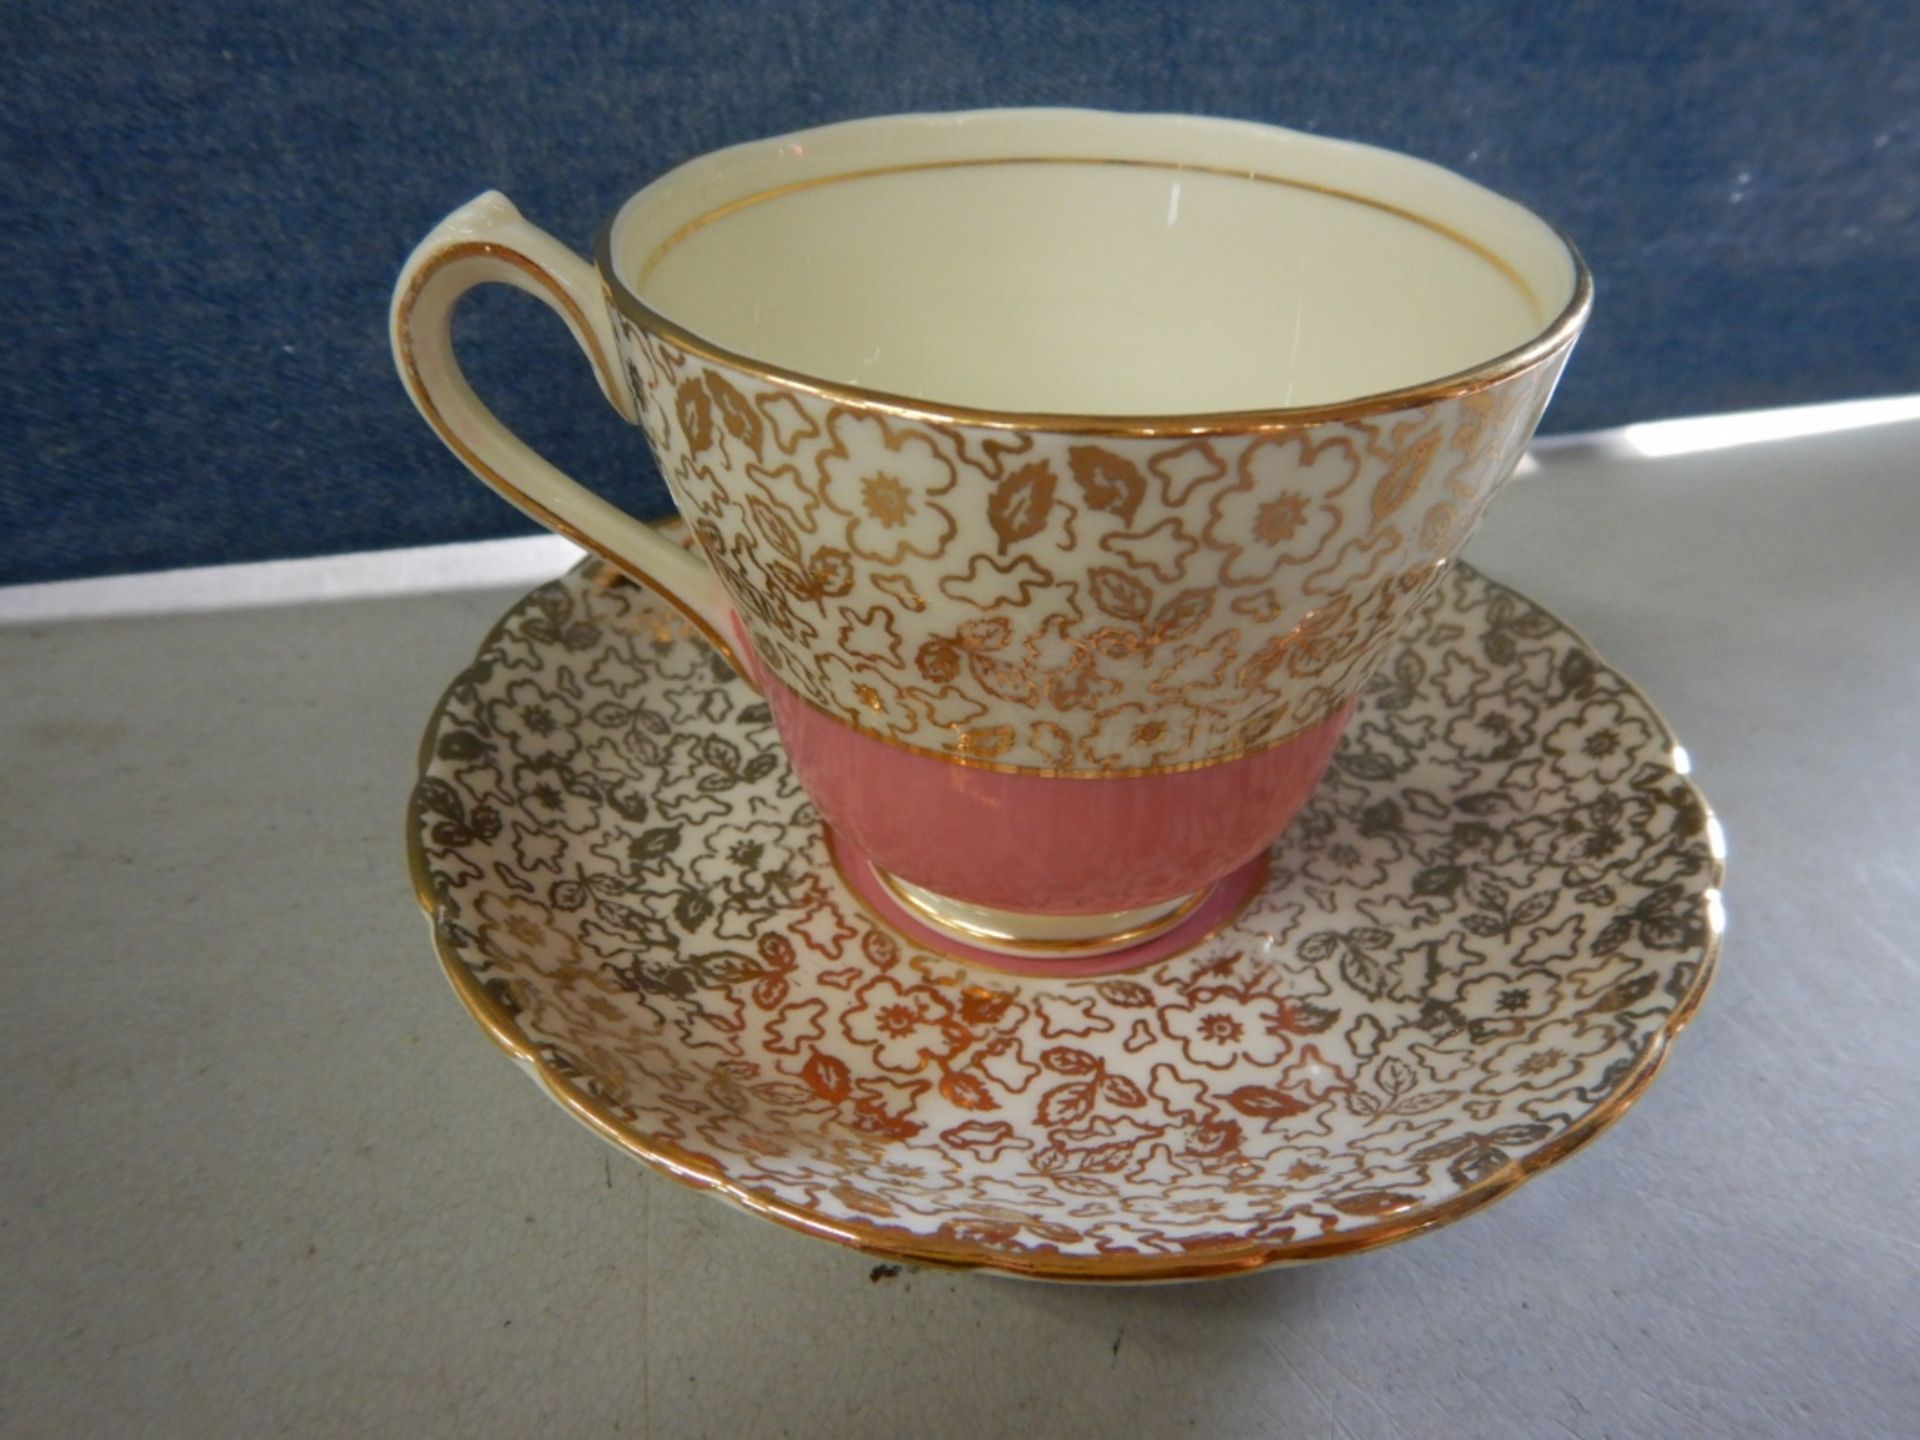 ANTIQUE TEACUP & SAUCER- MADE IN ENGLAND - FINE BONE CHINA "ROYAL CHELSEA" - #3776A - Image 3 of 5